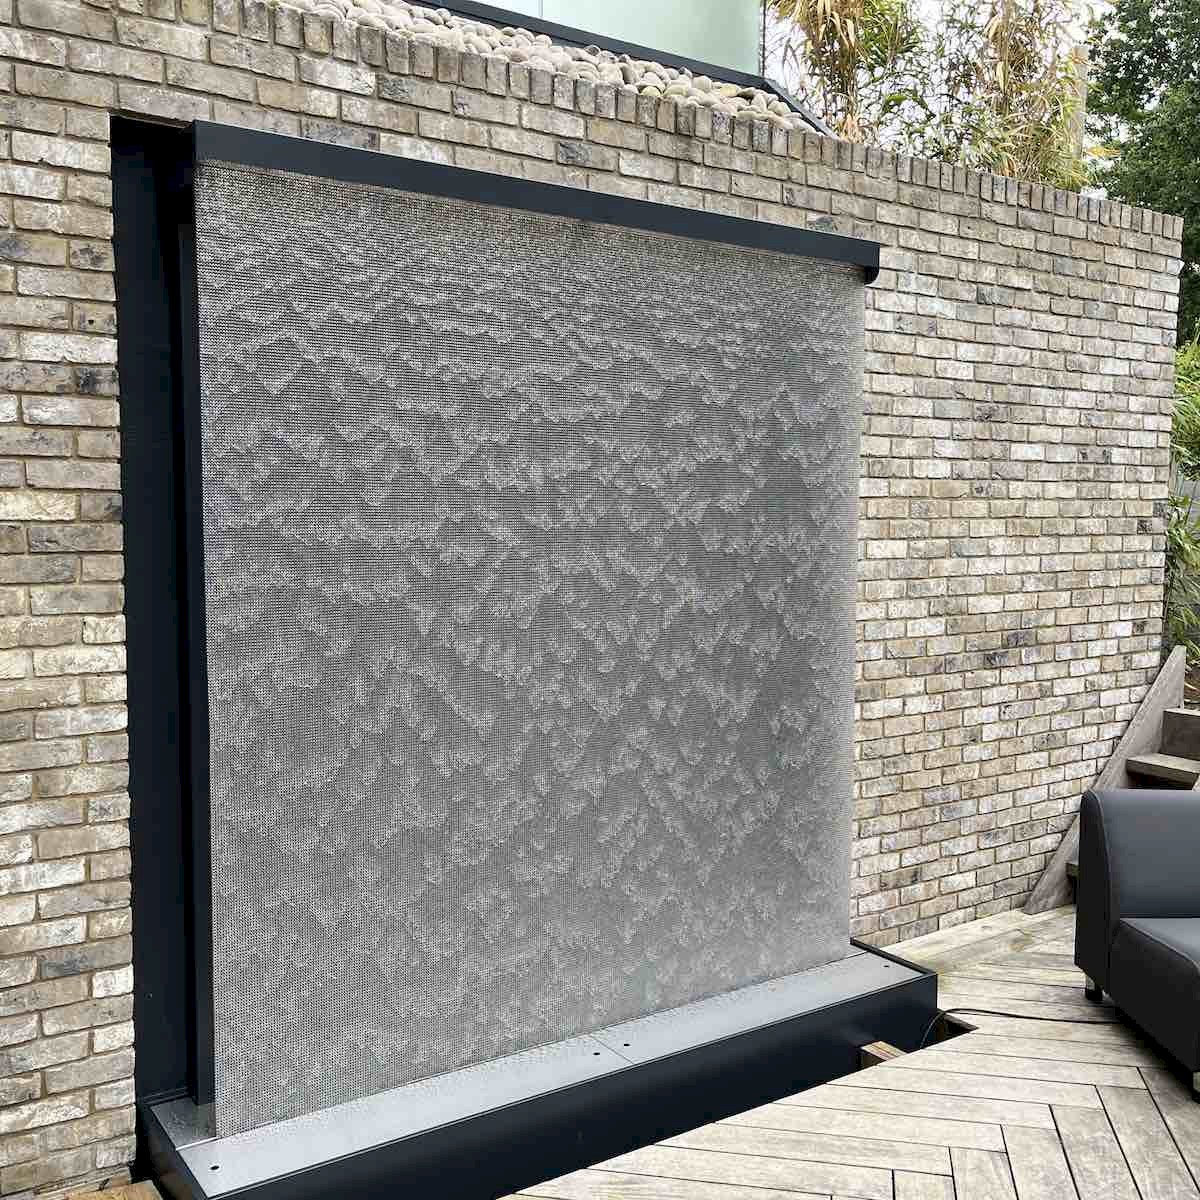 AquaVeil water wall fitted within a recessed brick wall to provide a more integrated appearance.